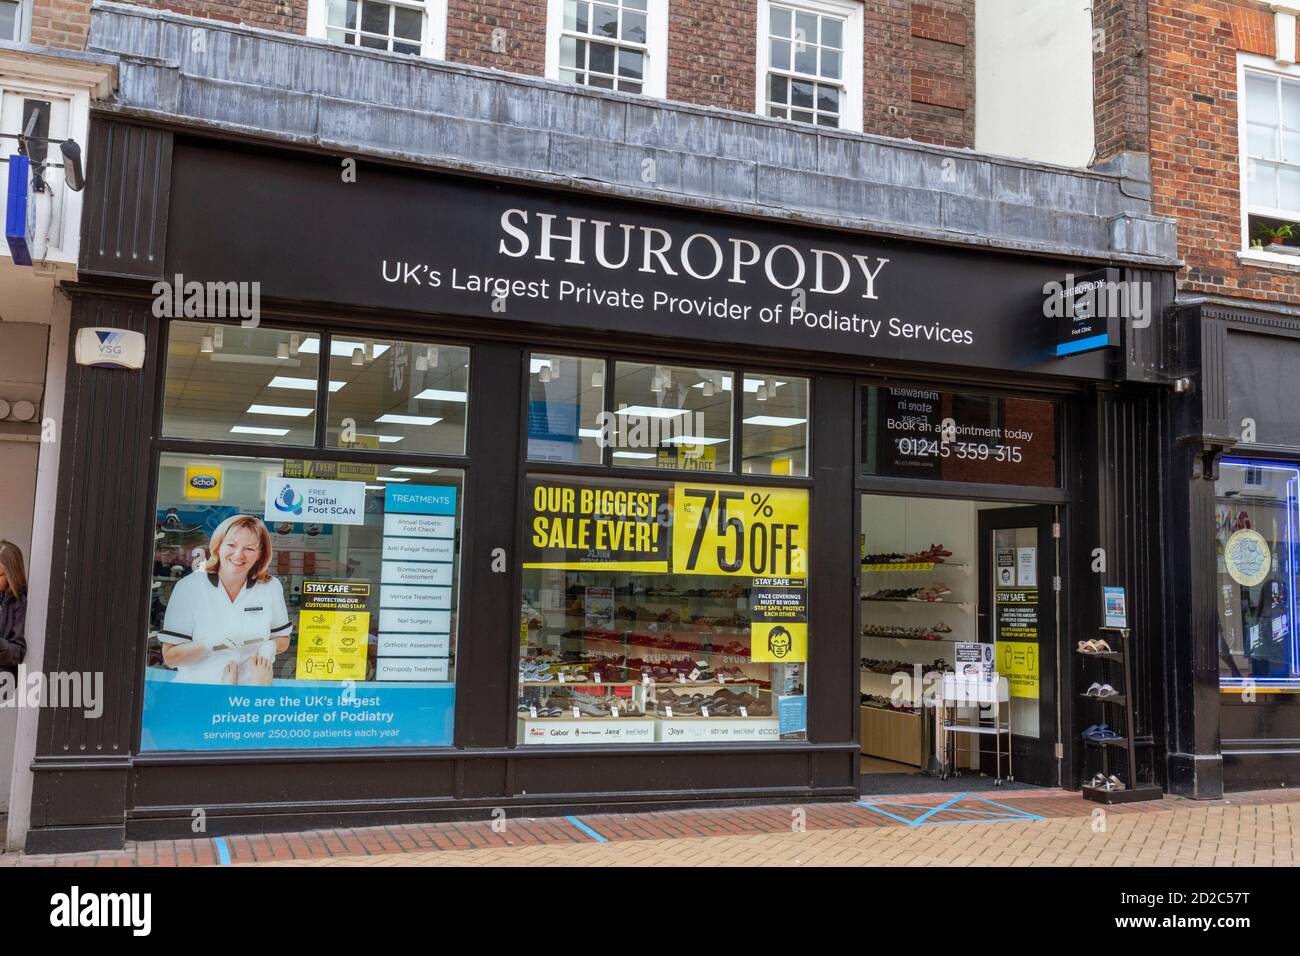 The Shuropody podiatry service store in Chelmsford, Essex, UK. Stock Photo